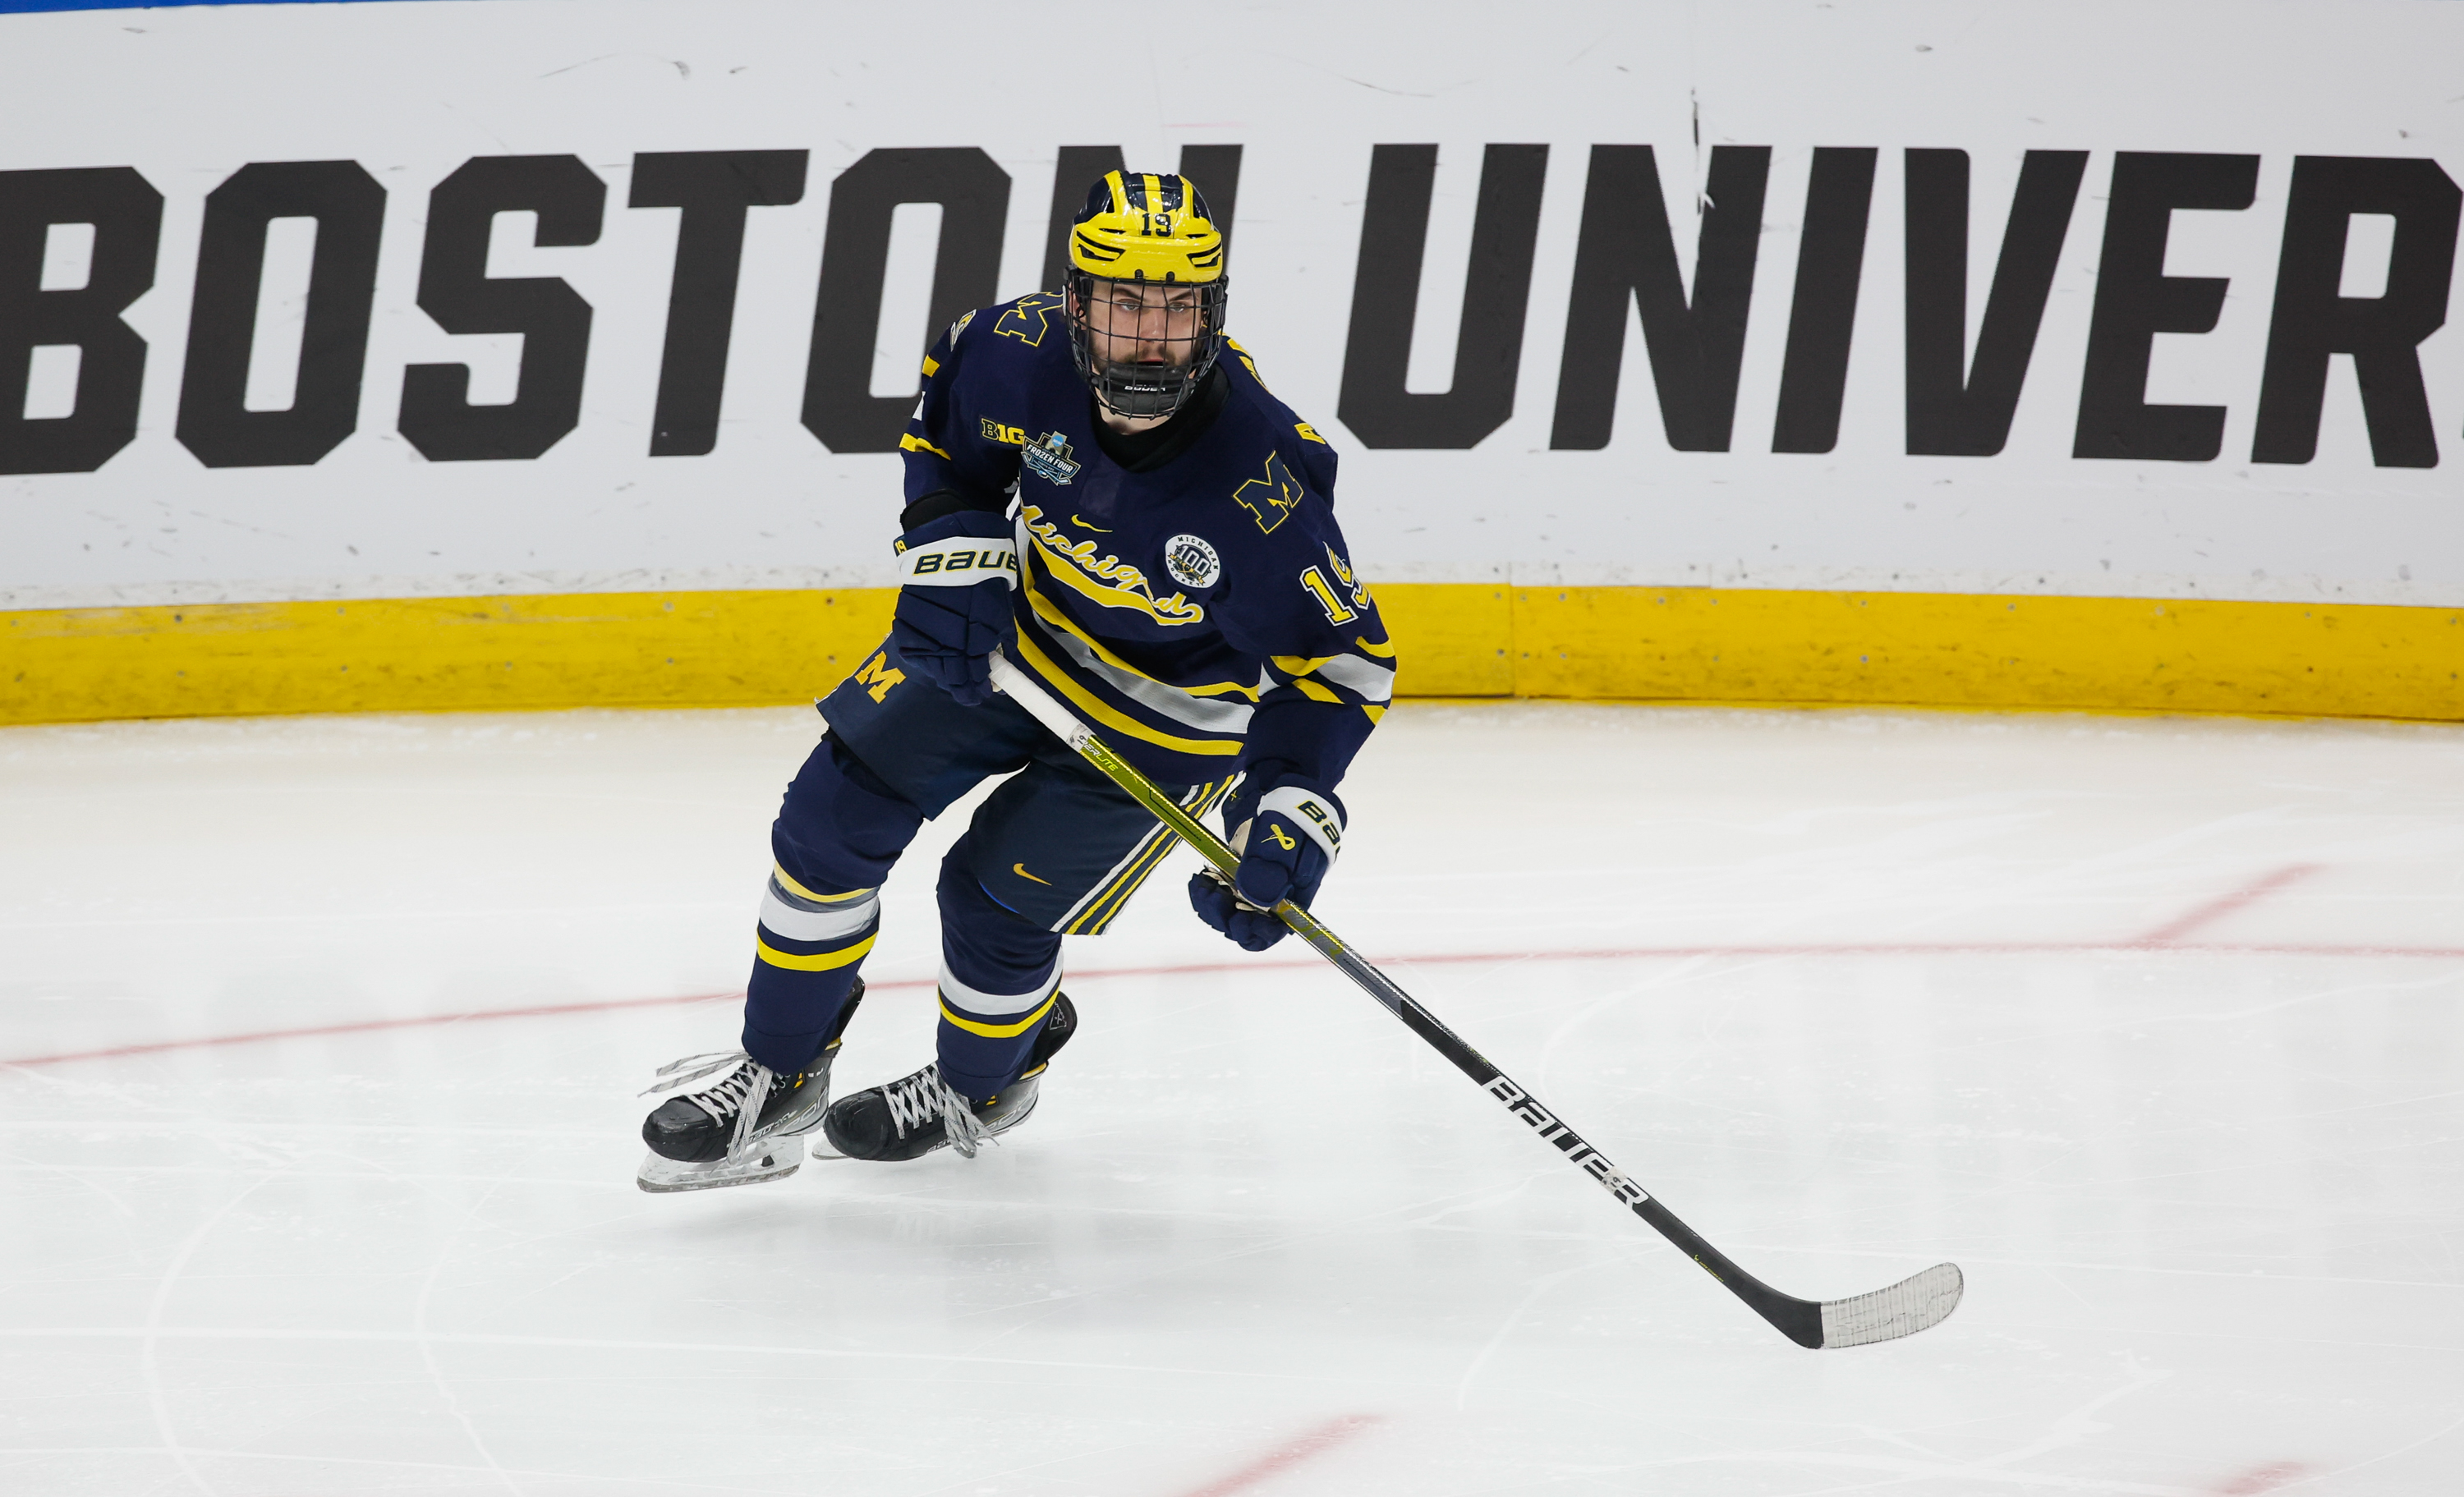 Adam Fantilli of the Michigan Wolverines skates against the Quinnipiac Bobcats during game two of the 2023 NCAA Division I Men’s Hockey Frozen Four Championship Semifinal at the Amaile Arena on April 6, 2023 in Tampa, Florida. The Bobcats won 6-2.